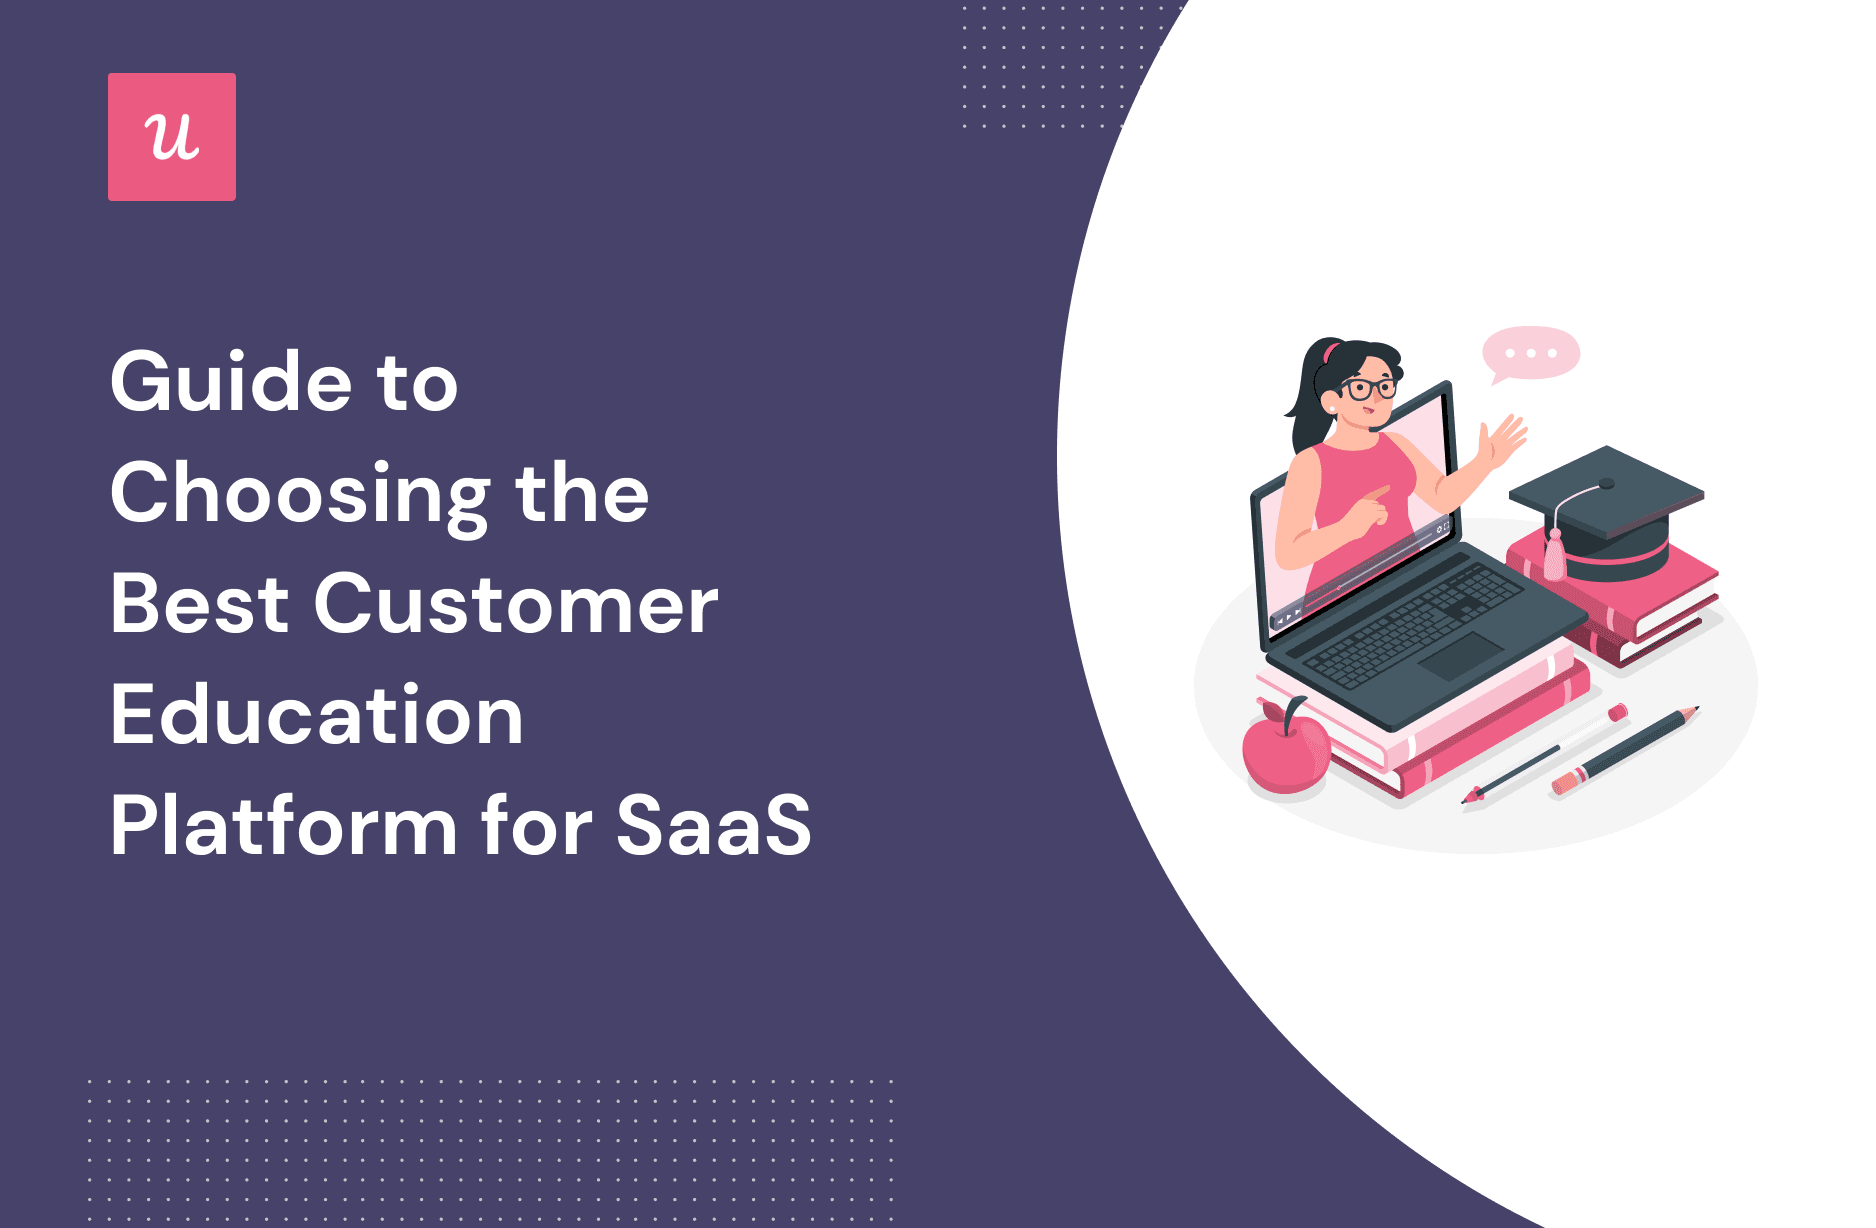 Guide to Choosing the Best Customer Education Platform for SaaS cover